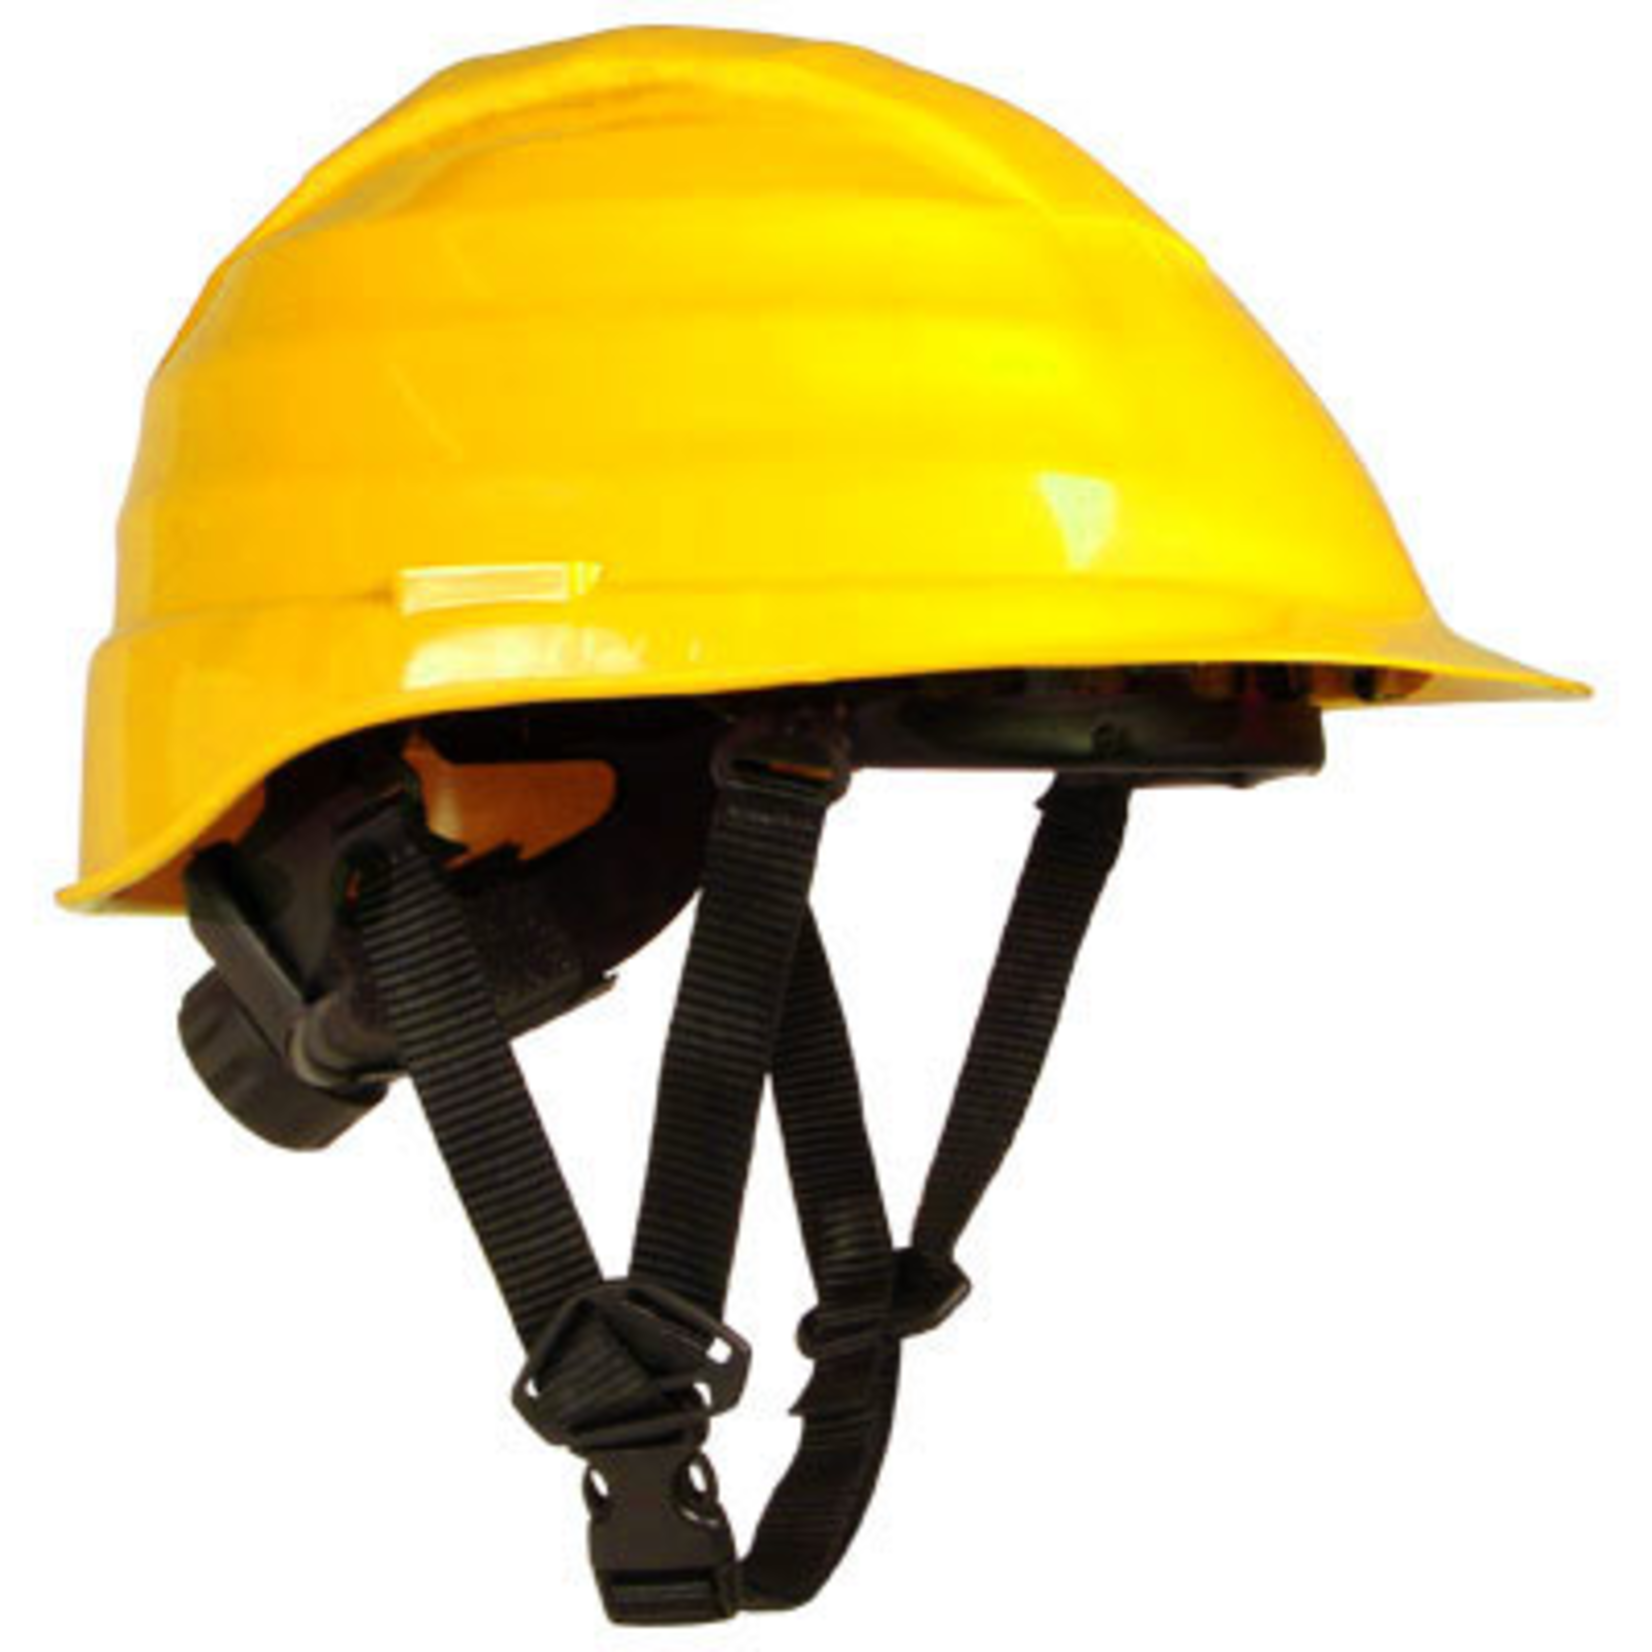 Rockman Rockman Dielectric Arborist Helmet In Yellow with 4 Point Chinstrap